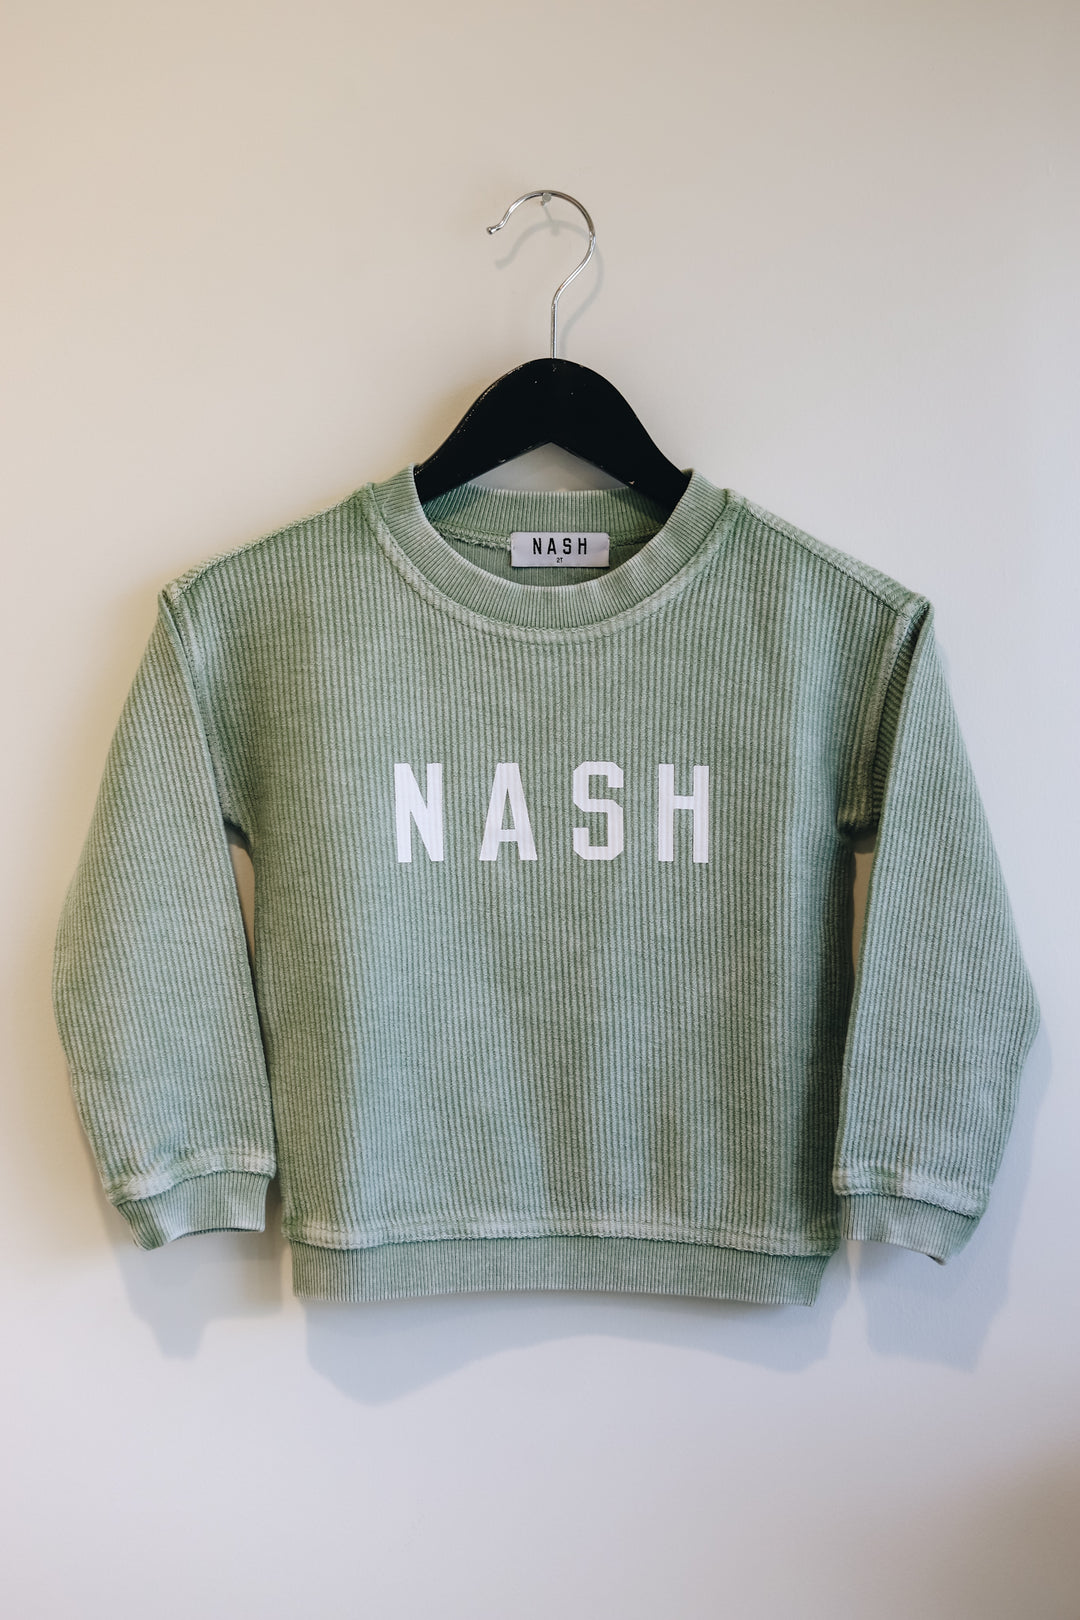 Front hanging view of the basil green corded kids crew, with nash screen printed on front